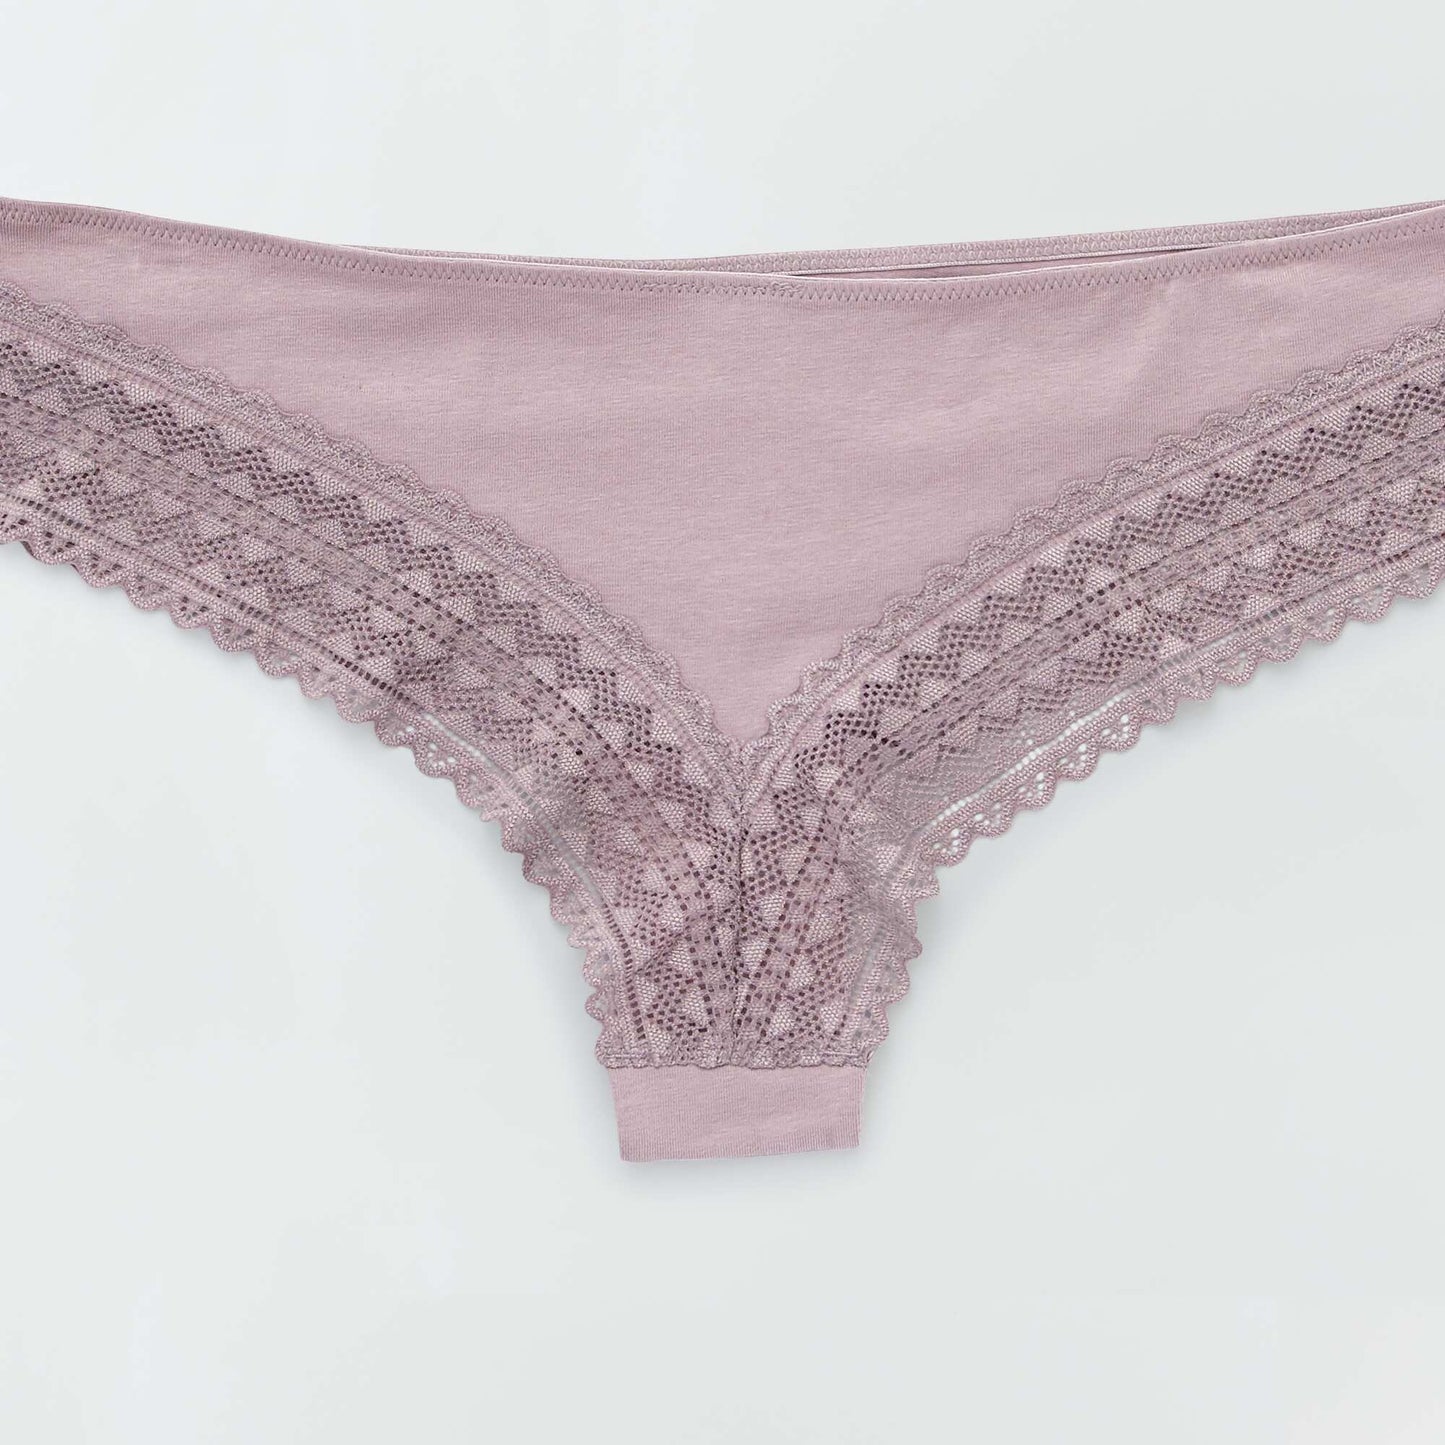 Pack of 3 cotton and lace tanga briefs grey pink